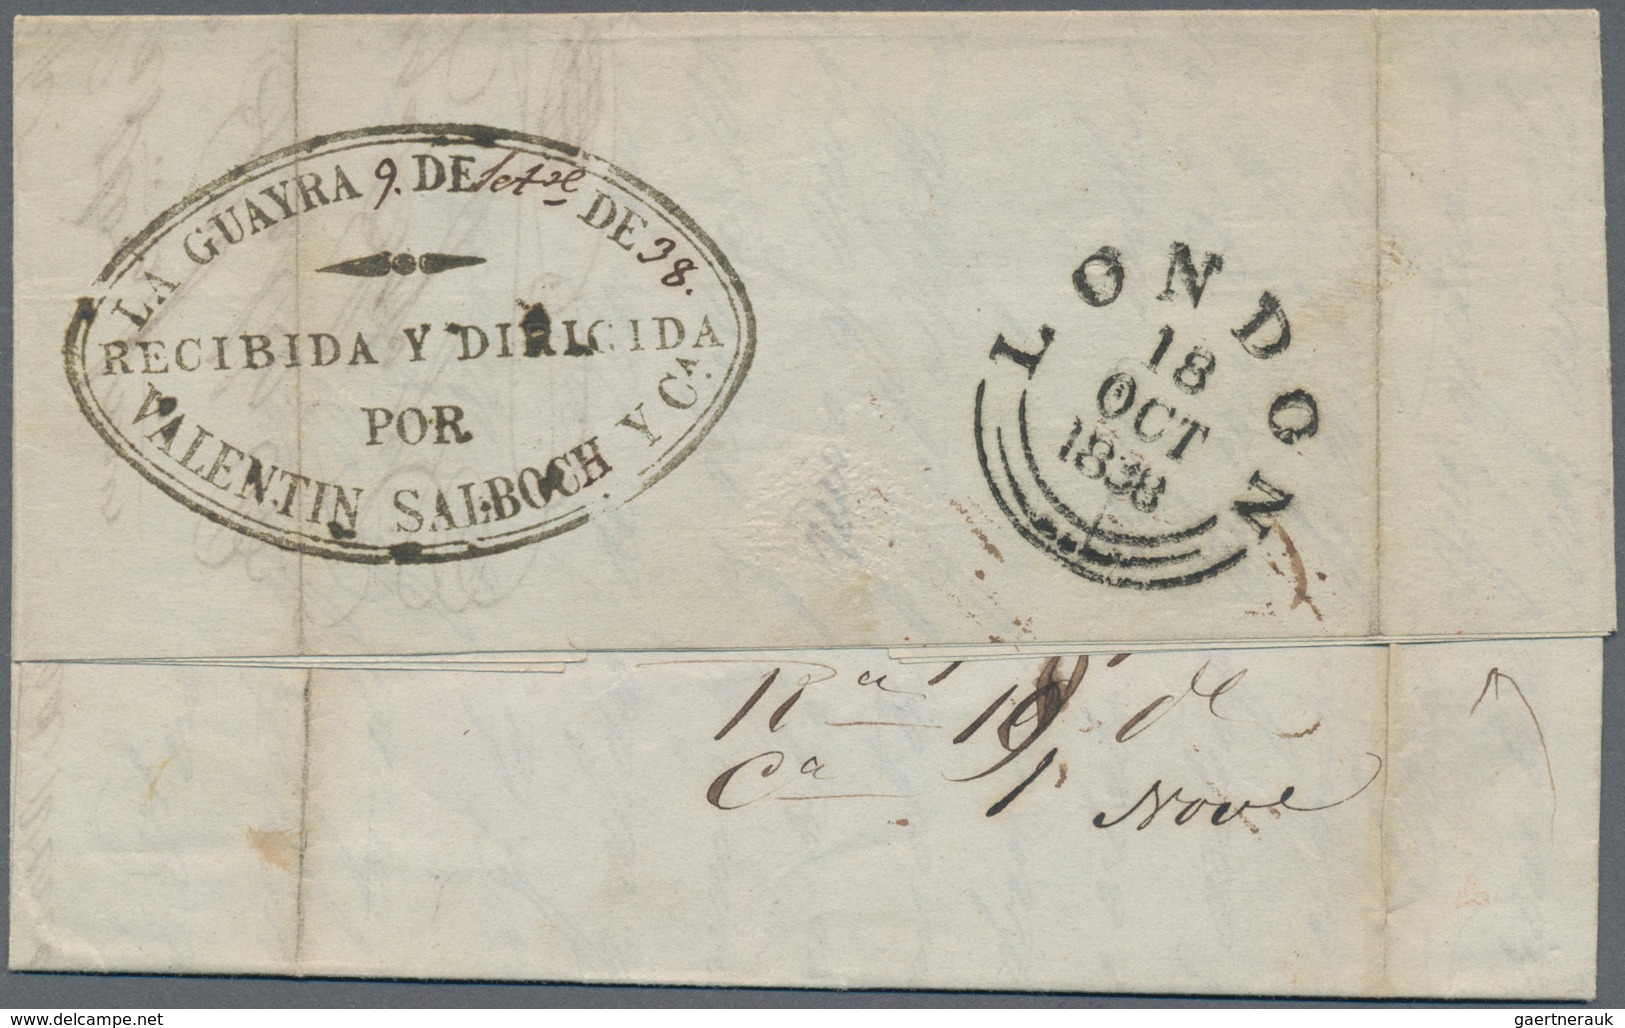 Venezuela: 1838, "GUAYRA FRANCO" Red Oval Cancel On Folded Letter With Complete Text To London, On R - Venezuela